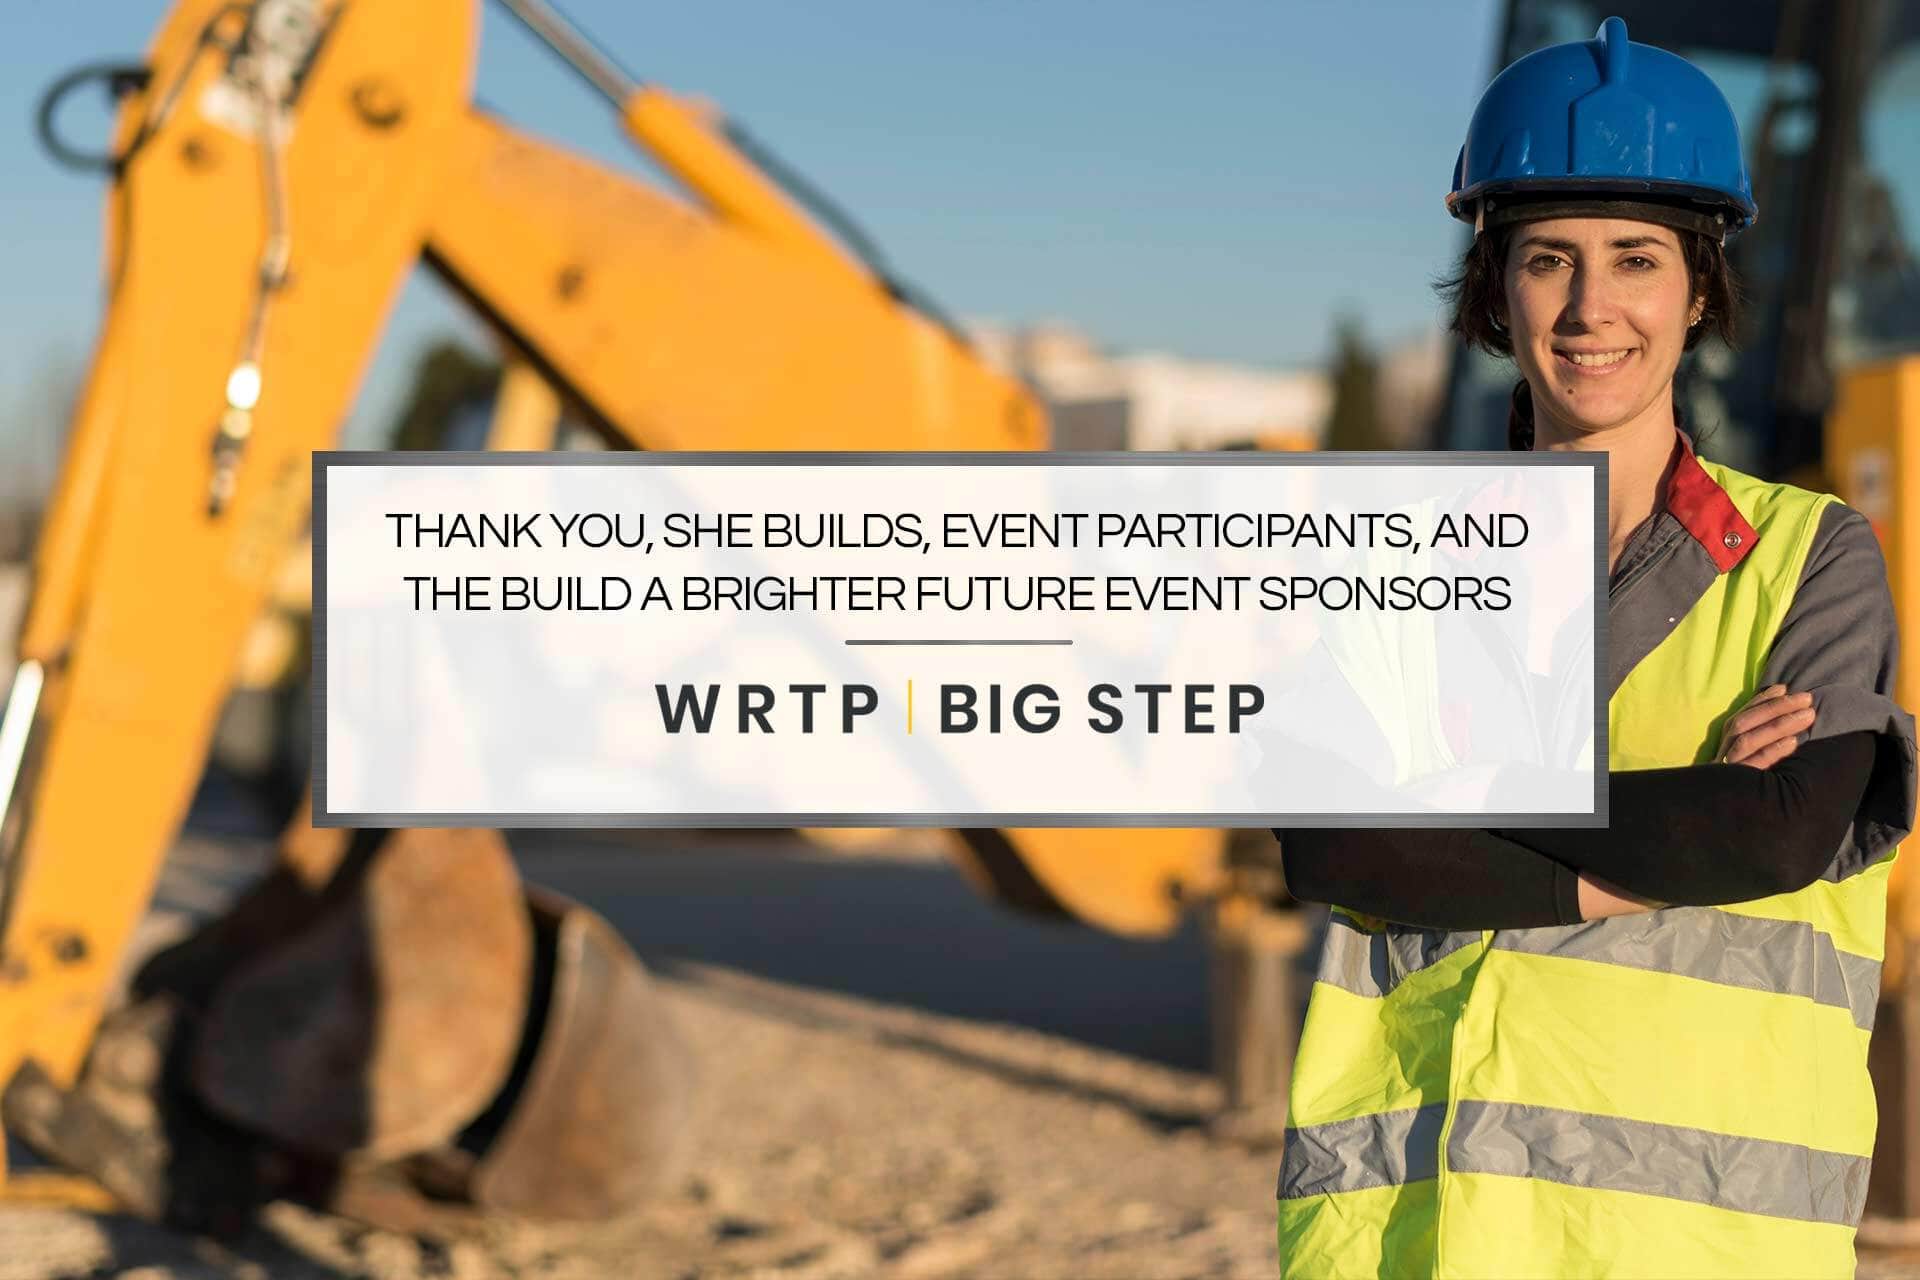 Thank You, She Builds, Event Participants, and the Build a Brighter Future Event Sponsors